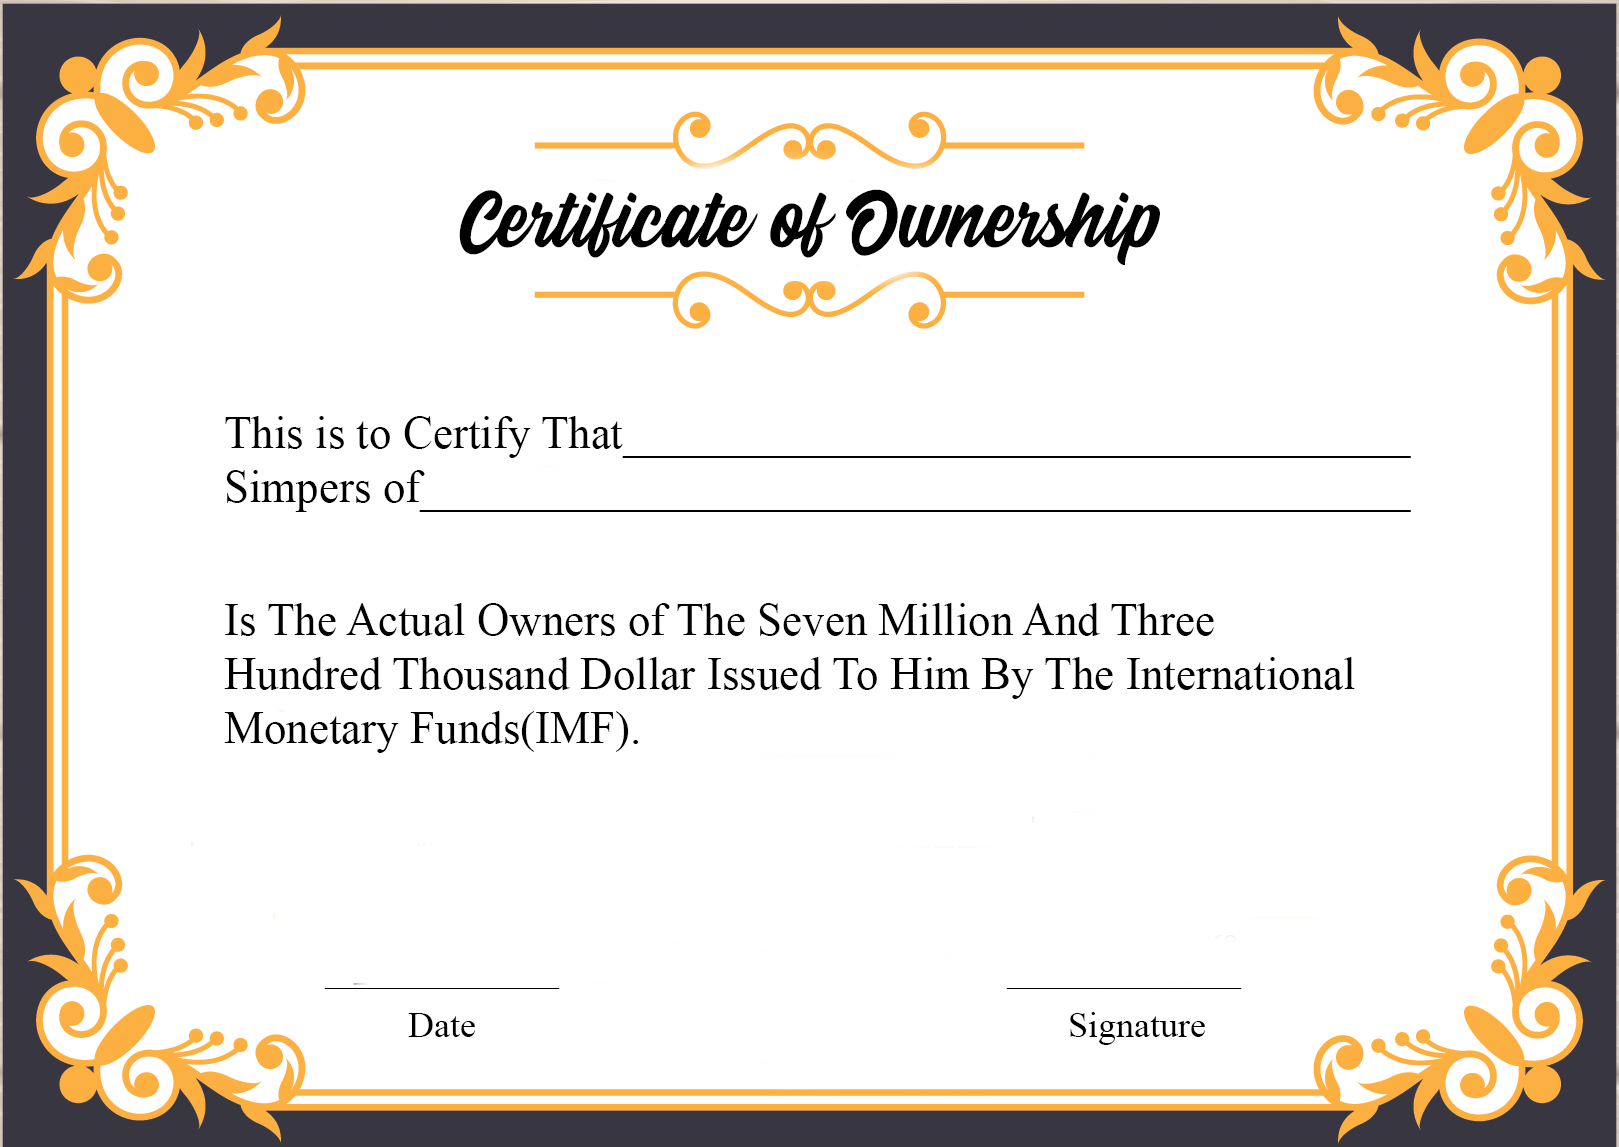 Free Sample Certificate Of Ownership Templates | Certificate For Certificate Of Ownership Template